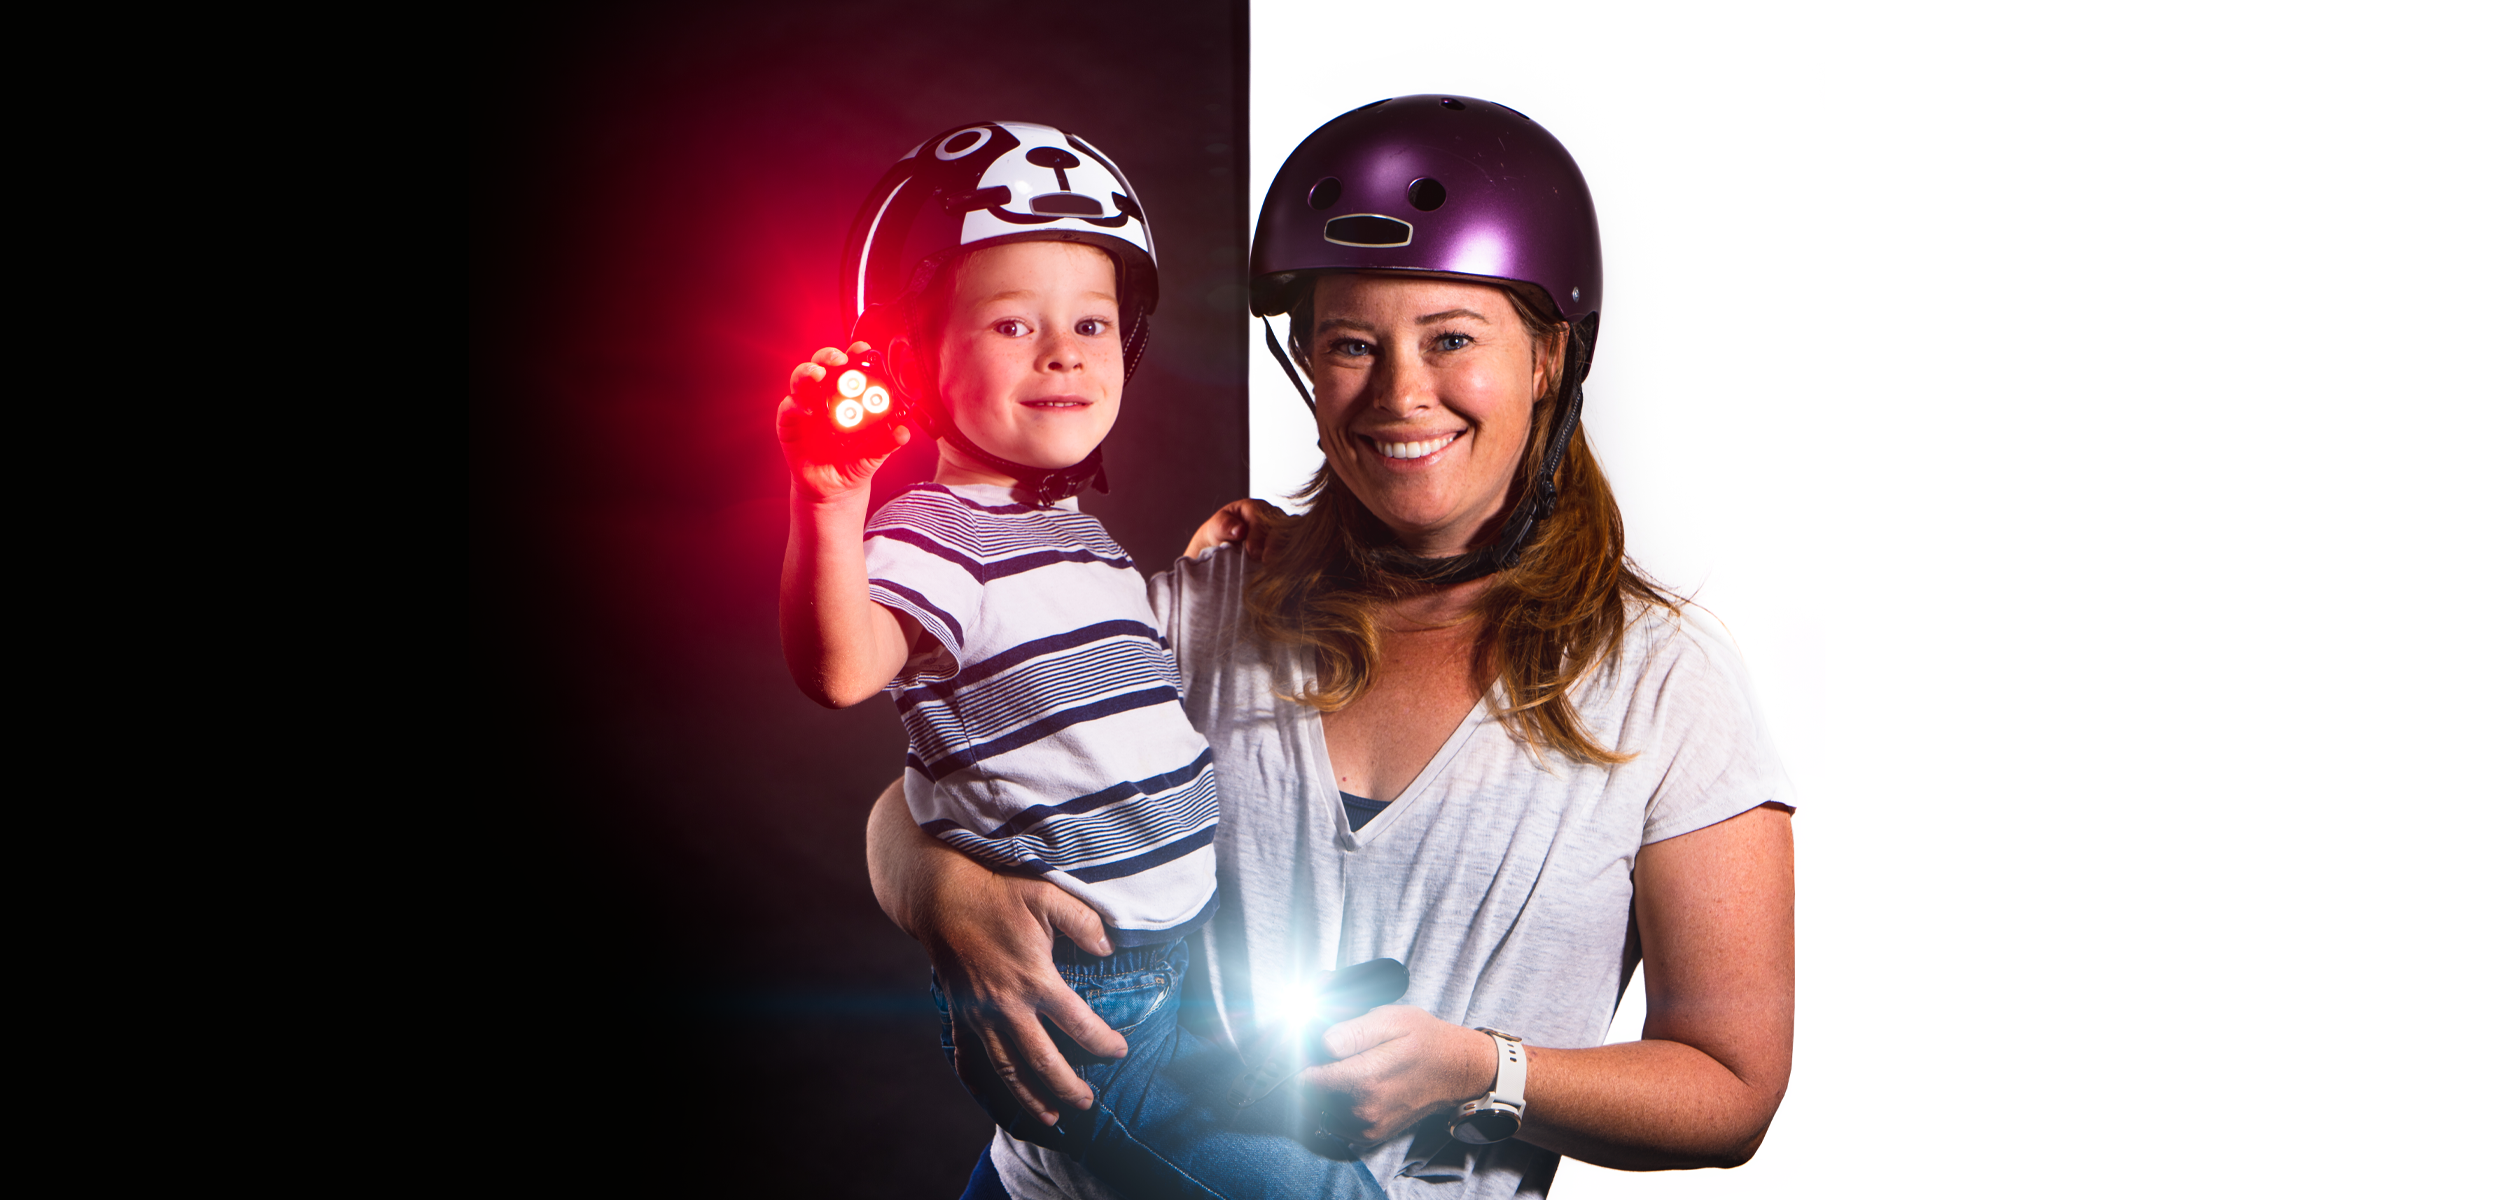 Mother and son wearing helmets while holding a front and rear light